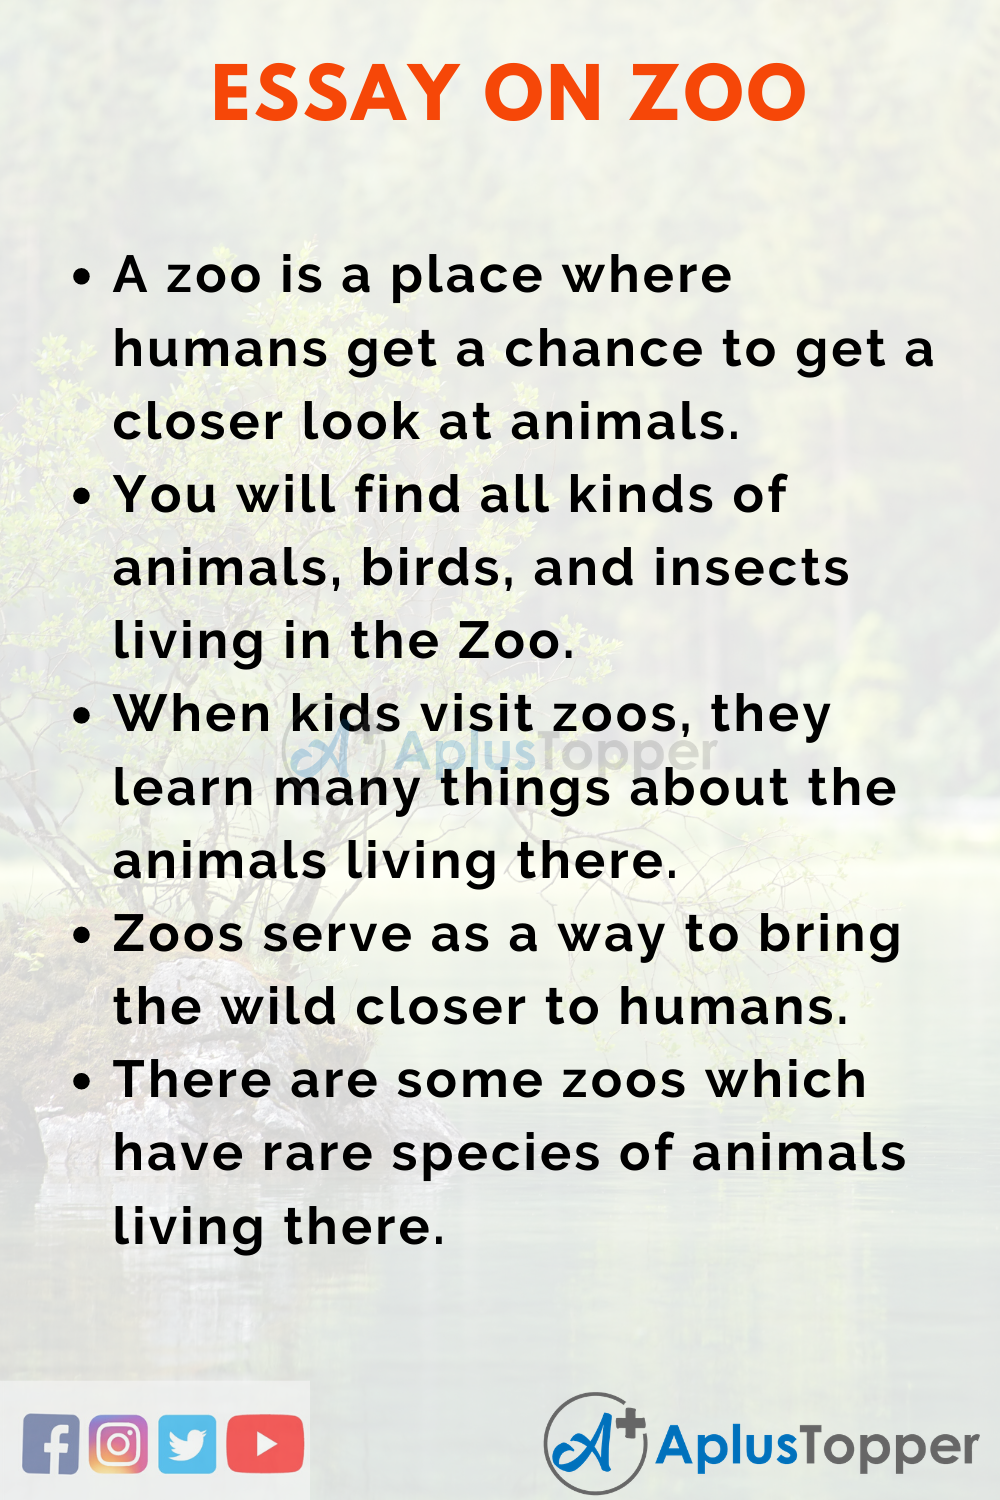 my visit to the zoo paragraph